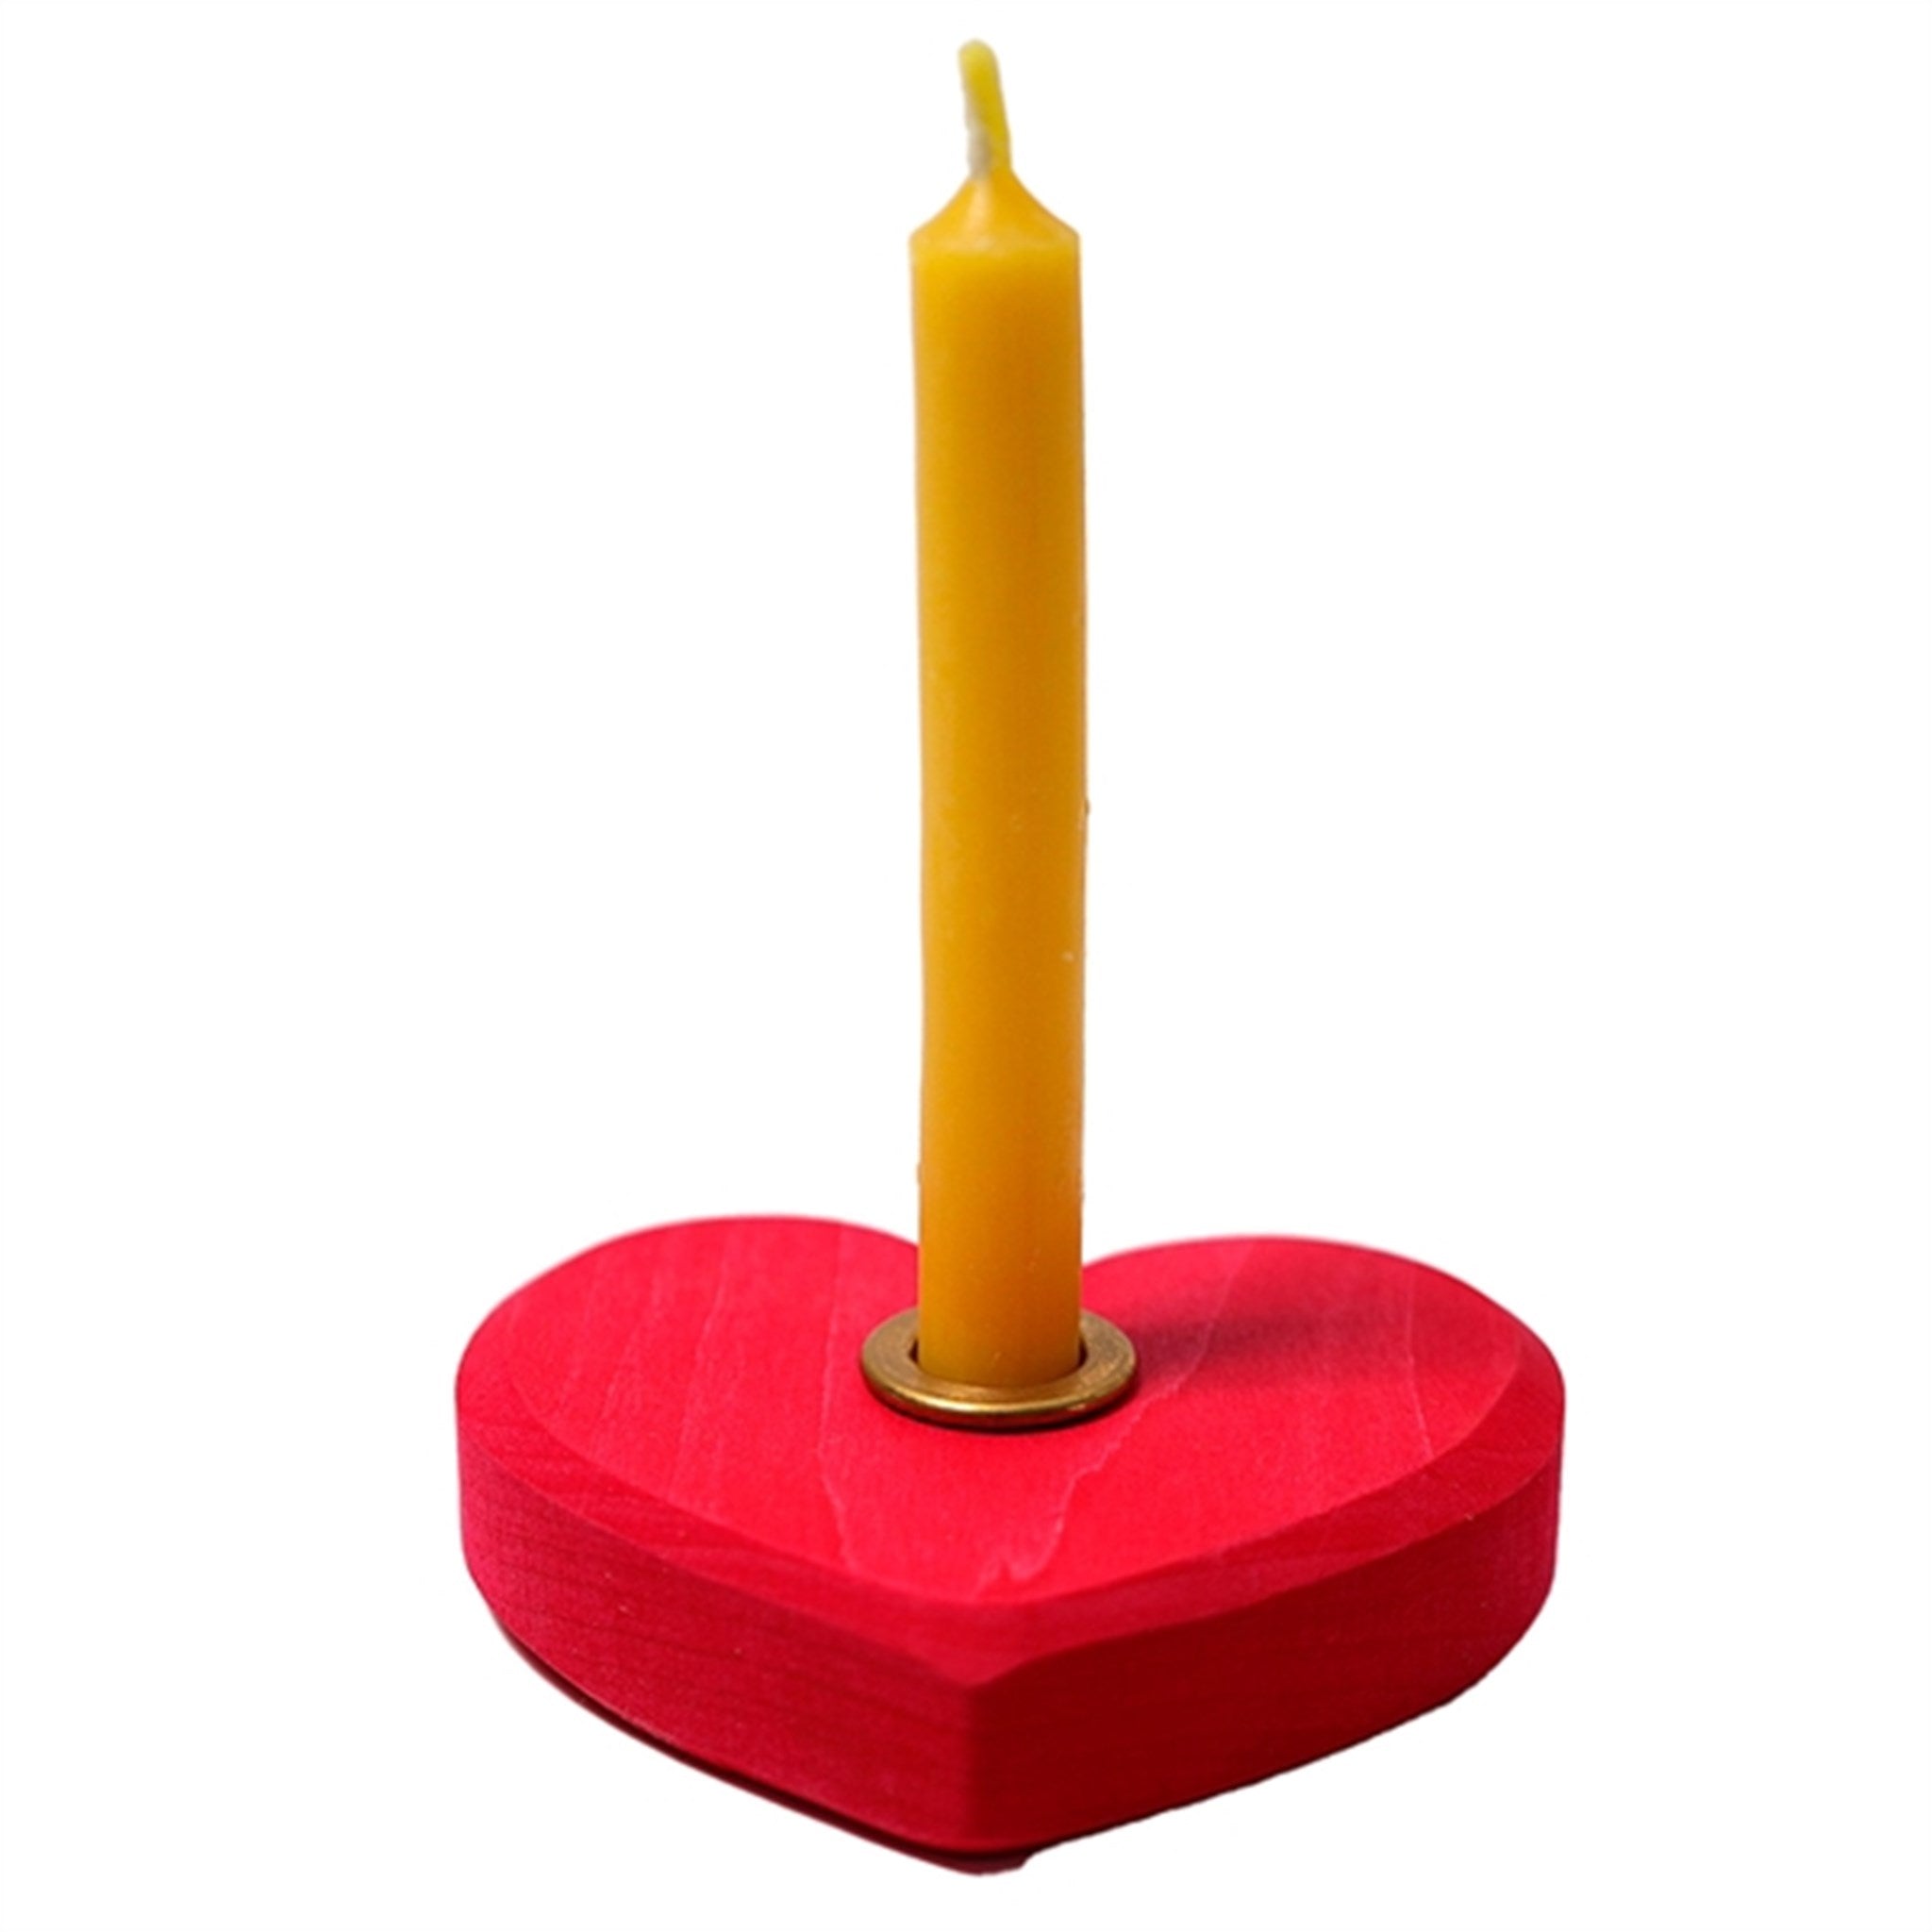 GRIMM´S Candle Ligth Small Heart Red 2